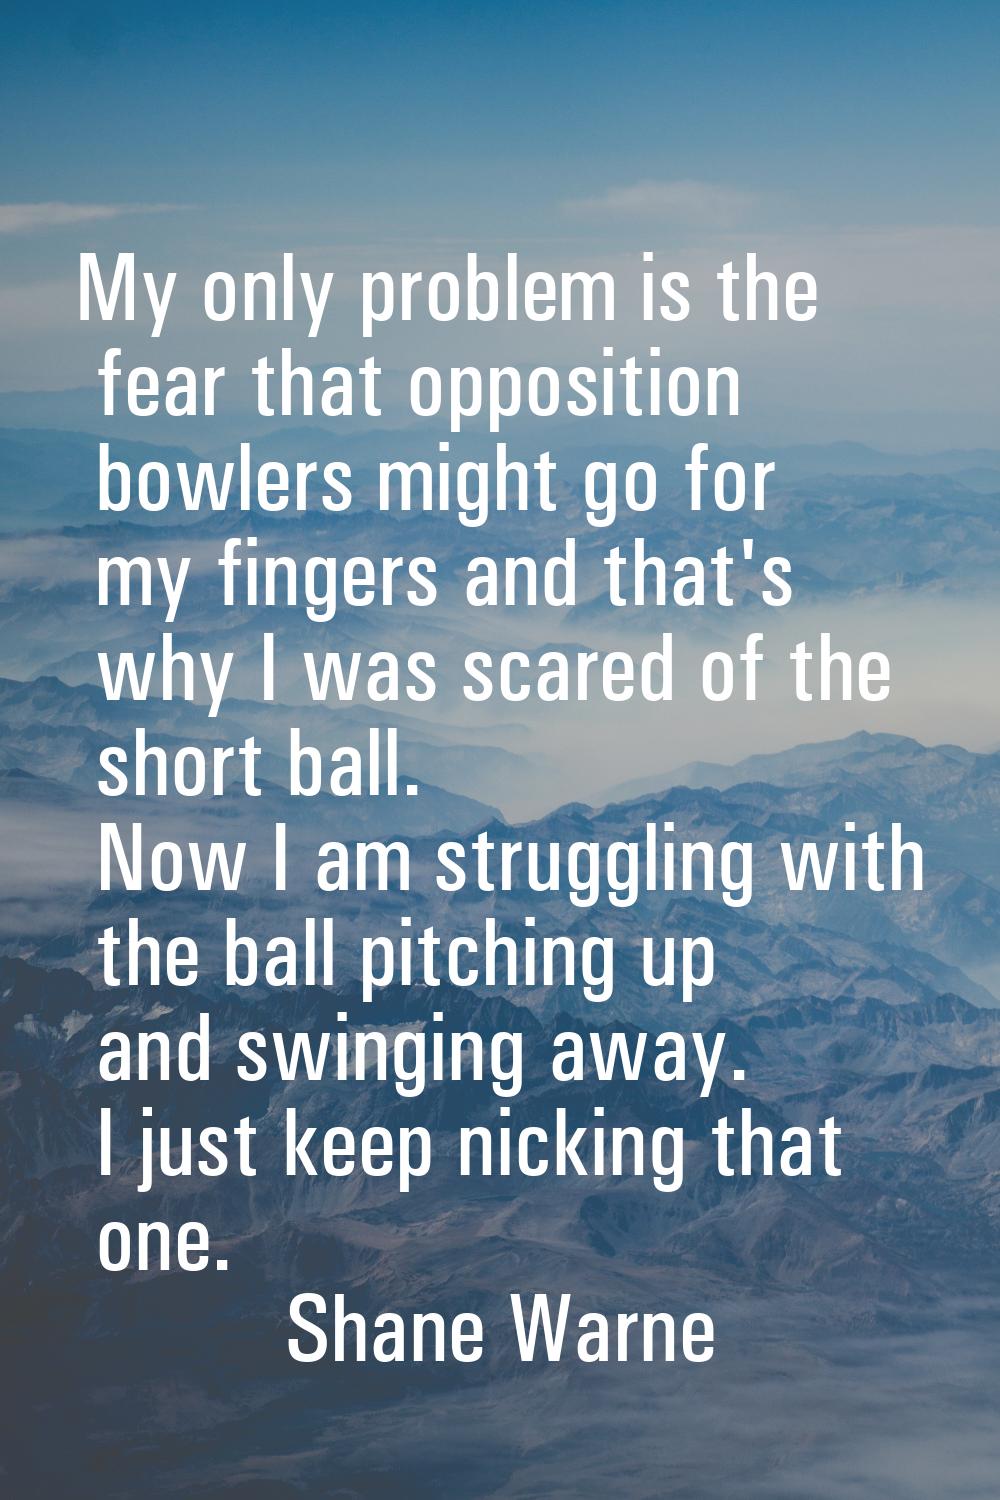 My only problem is the fear that opposition bowlers might go for my fingers and that's why I was sc